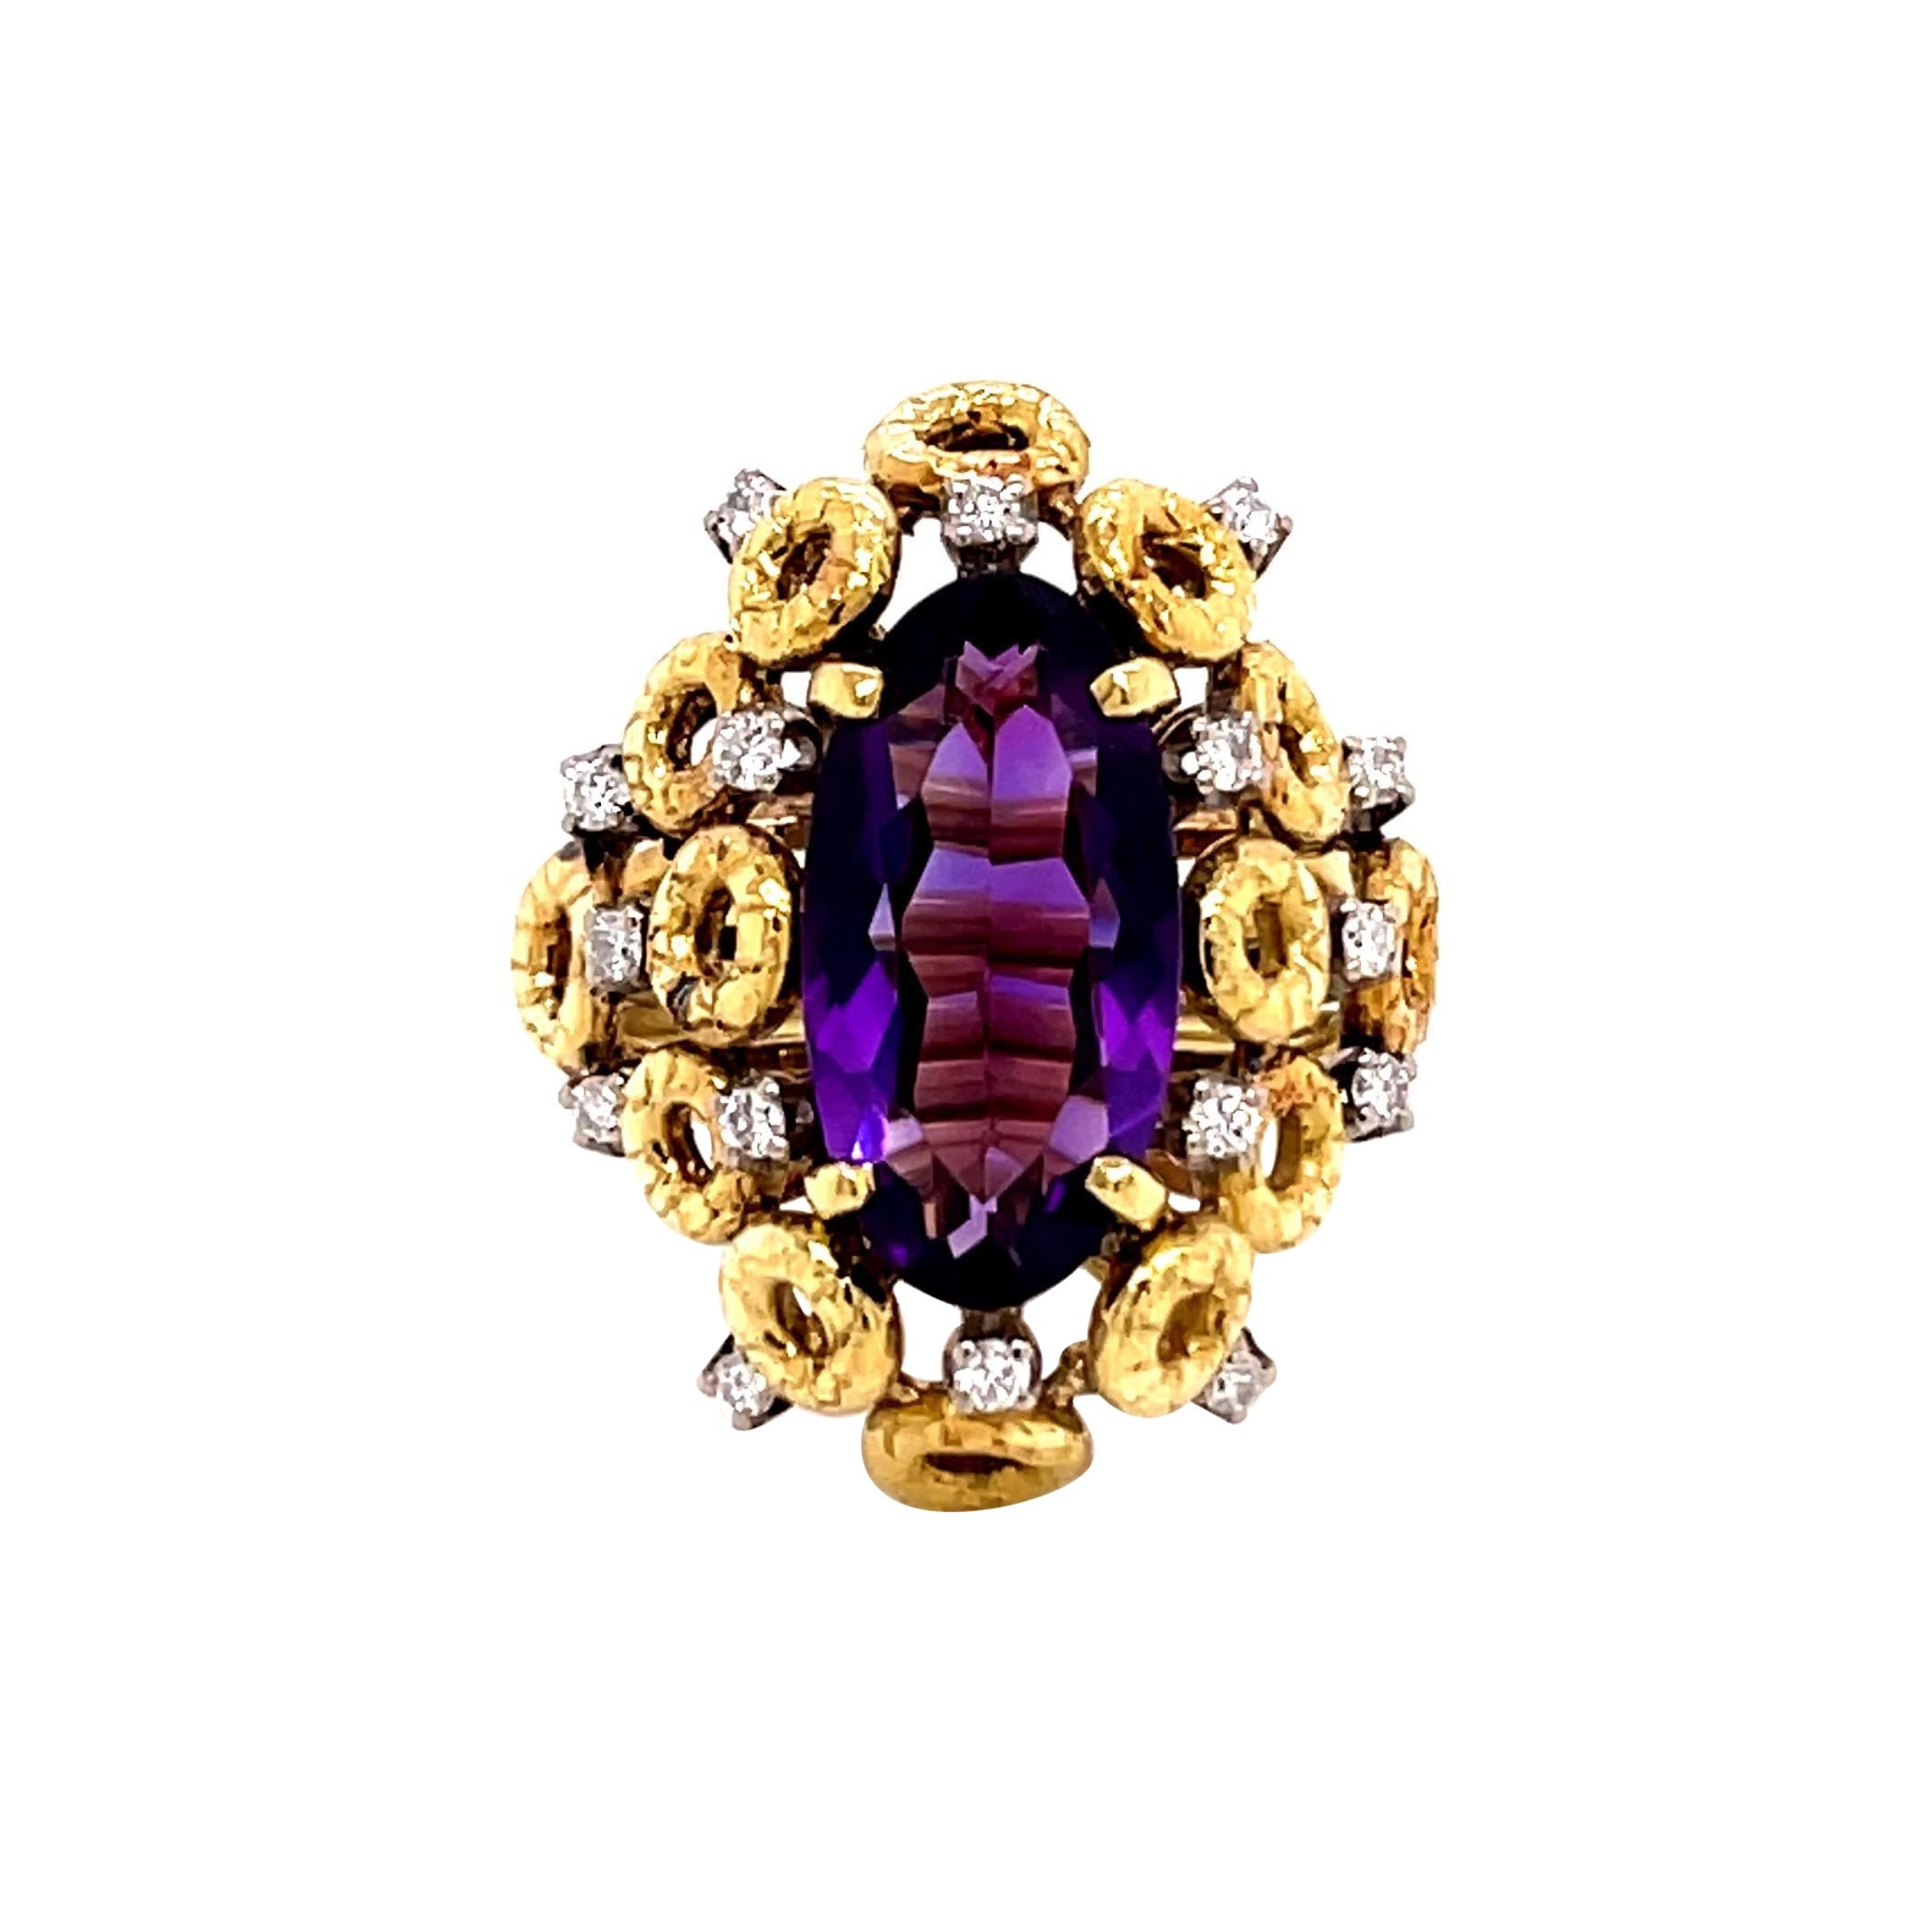 Vintage 1980's 3ct Oval Cut Amethyst Ring with Diamonds